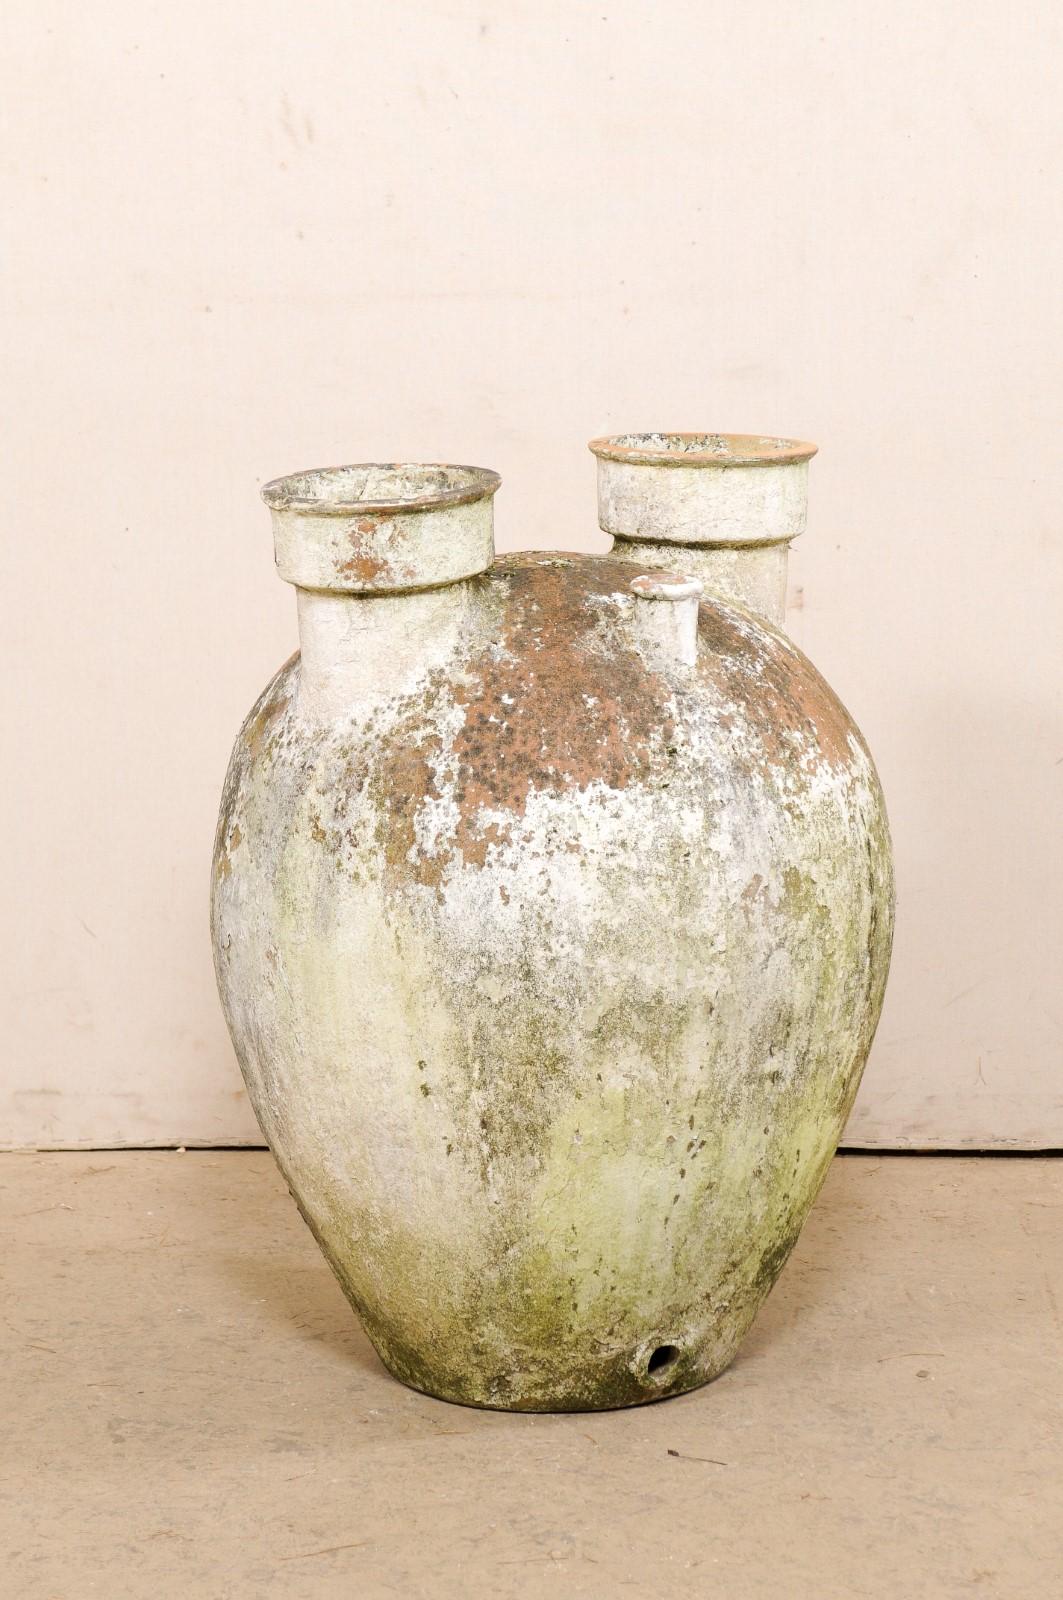 A Spanish large-sized terracotta vessel with fabulous patina from the turn of the 19th and 20th century. This antique clay jar from Spain is nicely sized, standing approximately 3 feet in height. Its rounded body is topped with a pair of larger